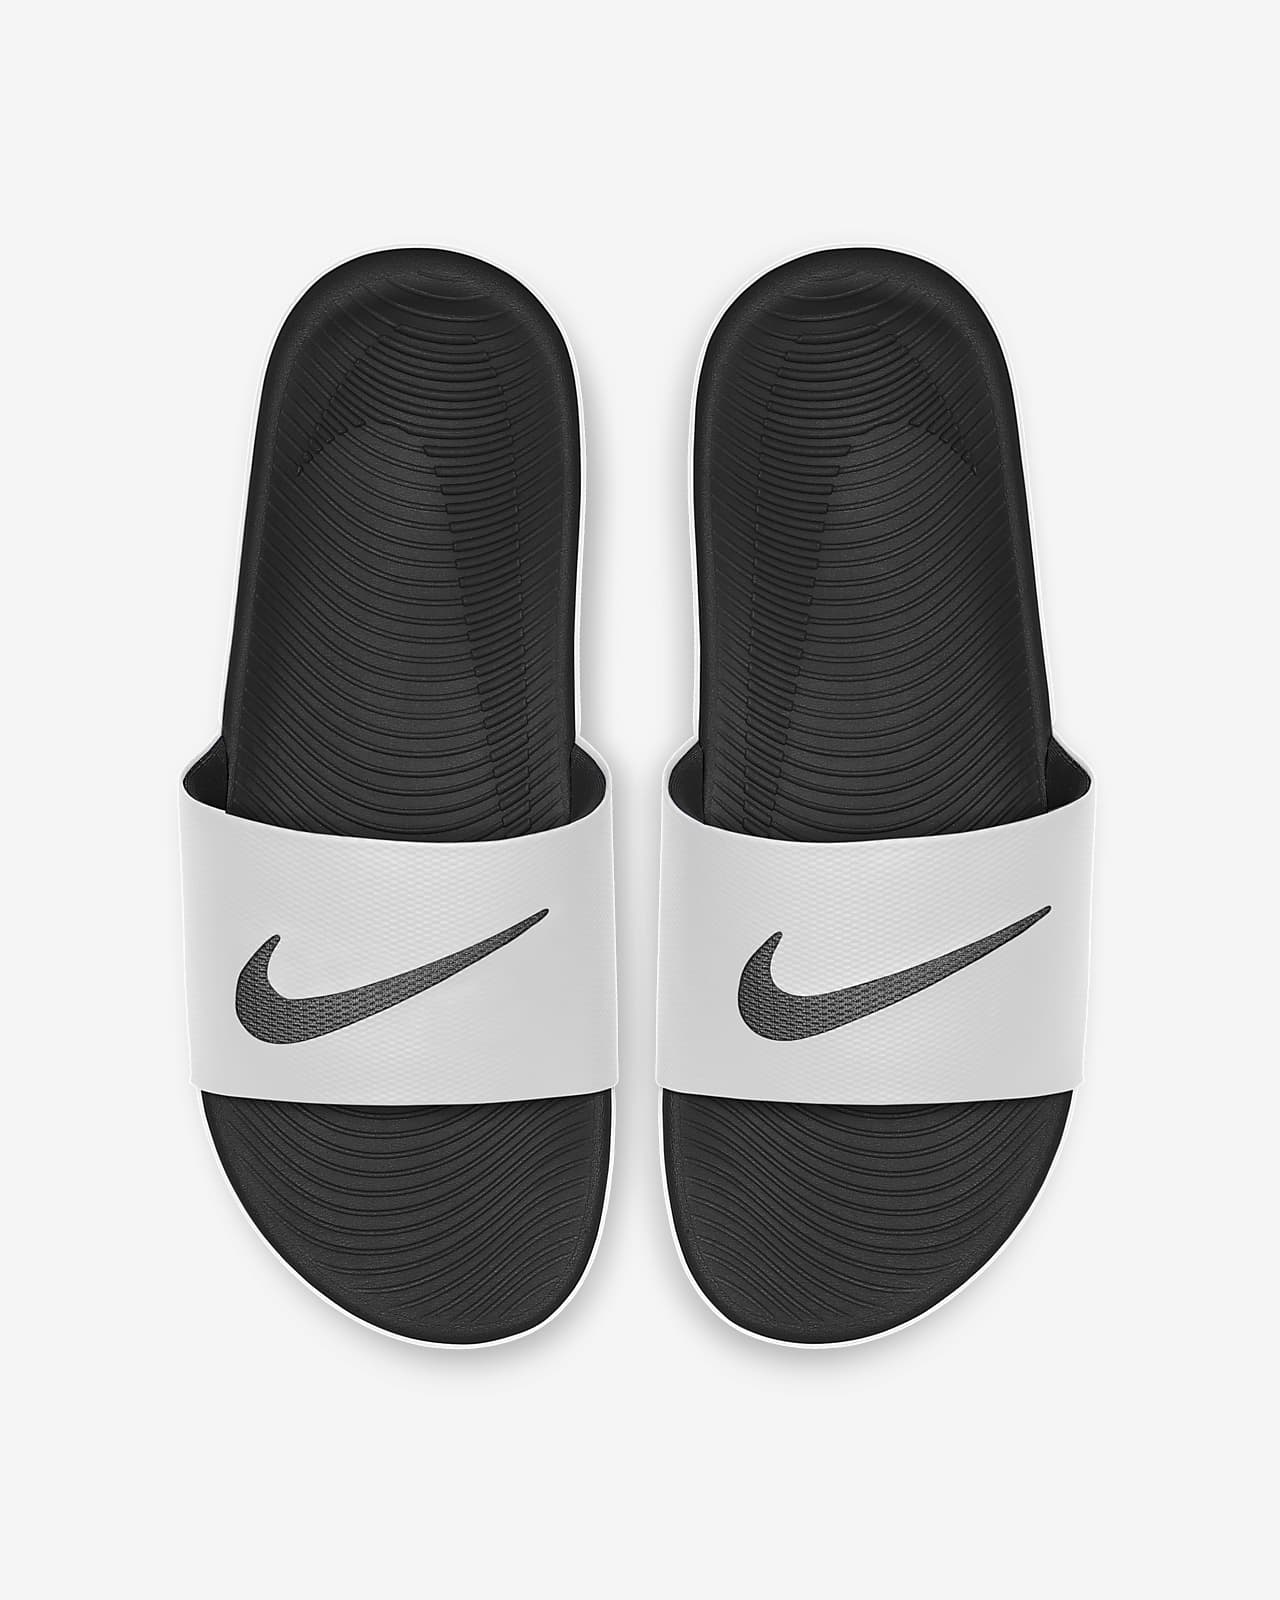 nike sports camps discount code